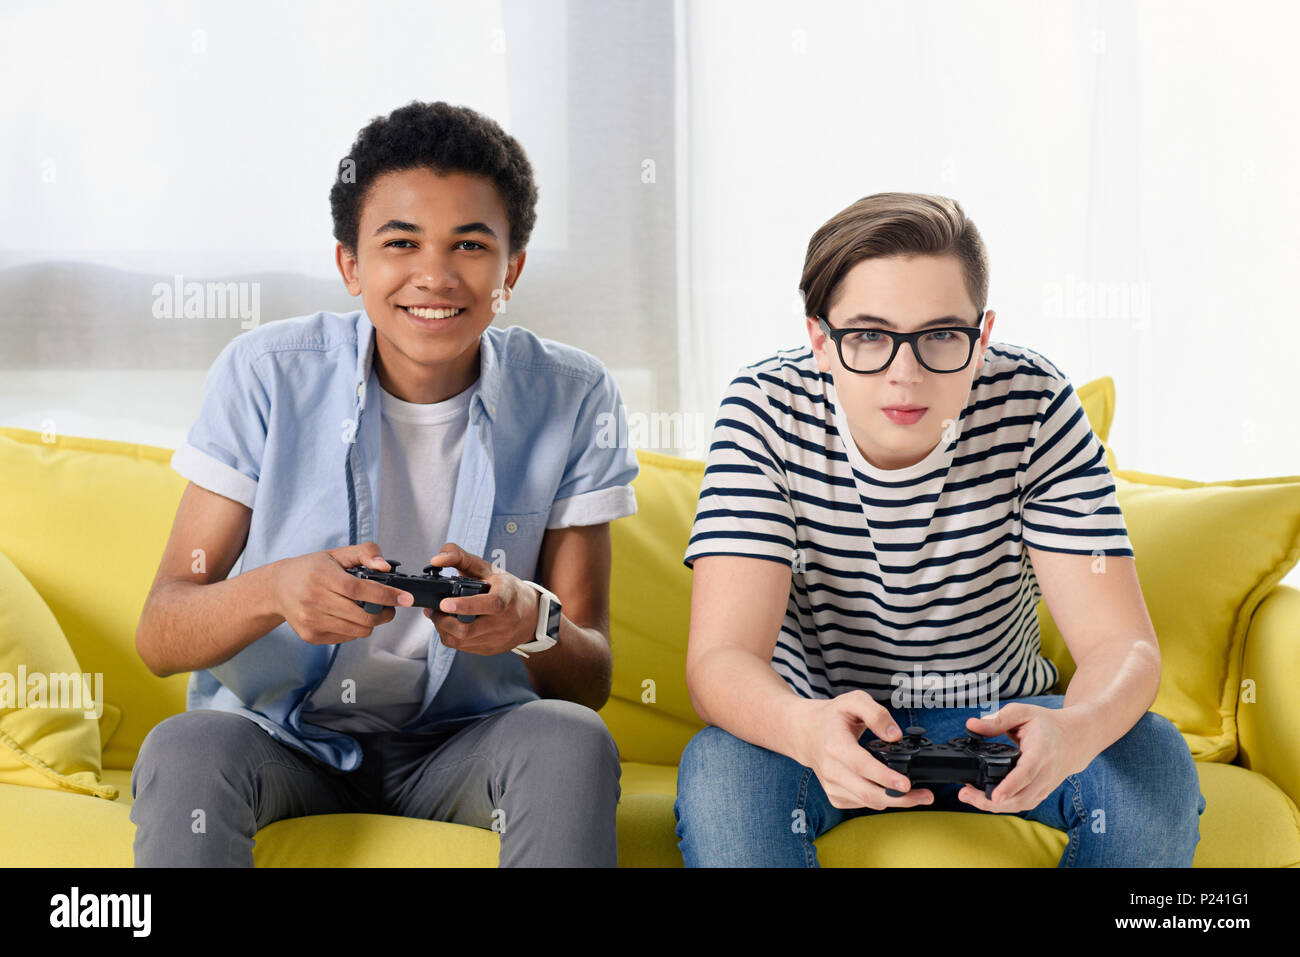 Excited multiethnic teen friends enjoying video games, free time at home, Stock image